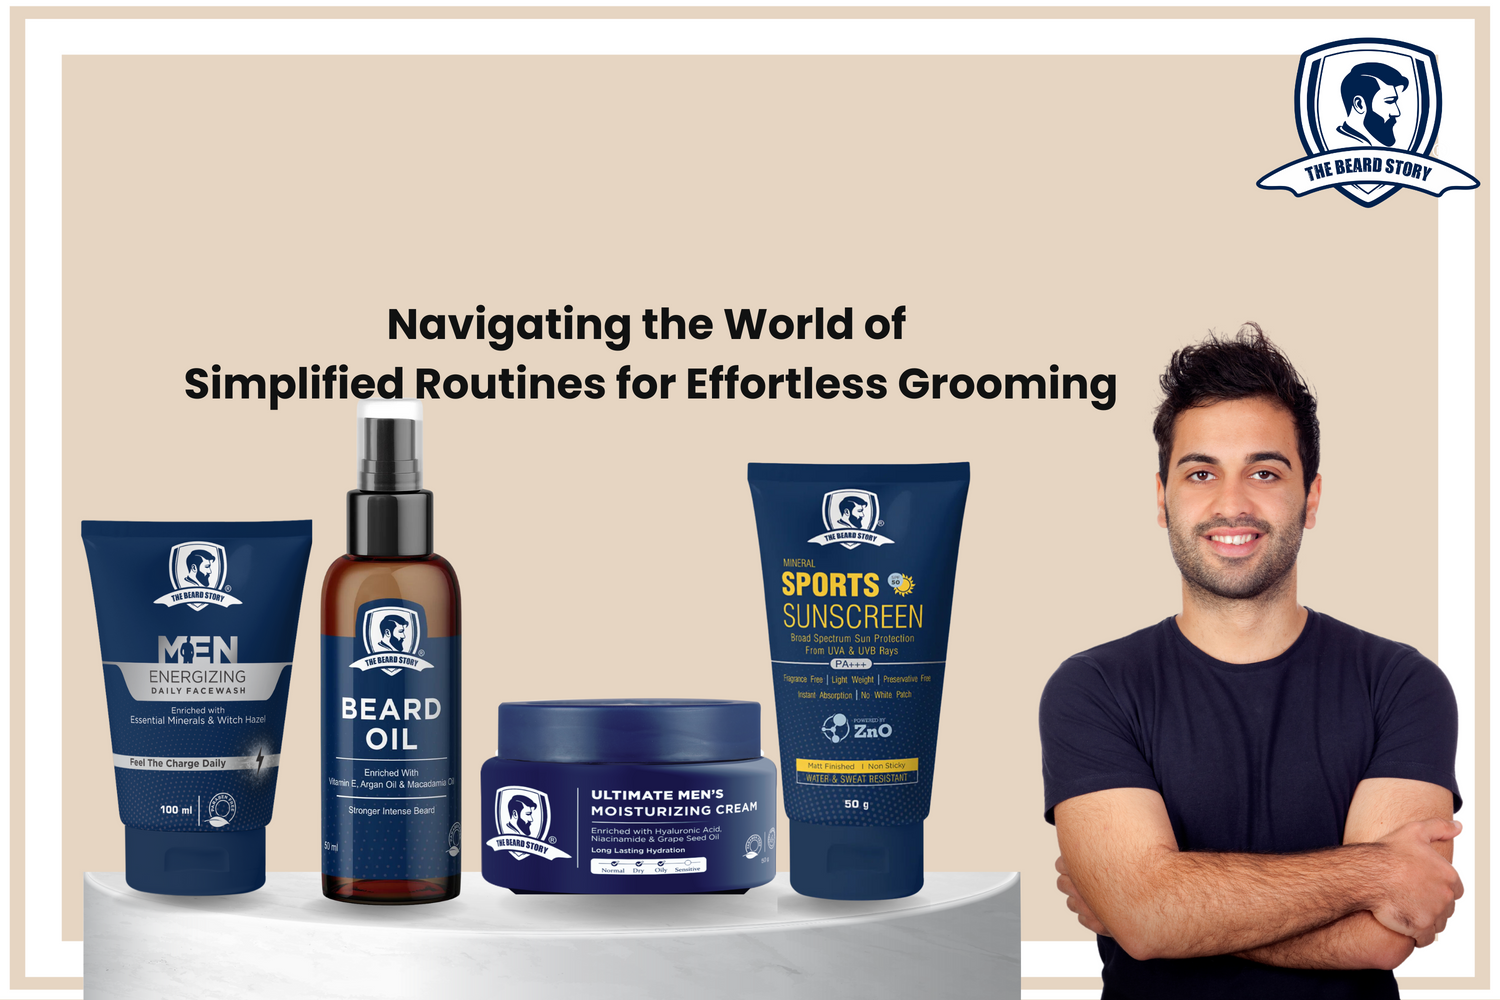 Navigating the World of Simplified Routines for Effortless Grooming